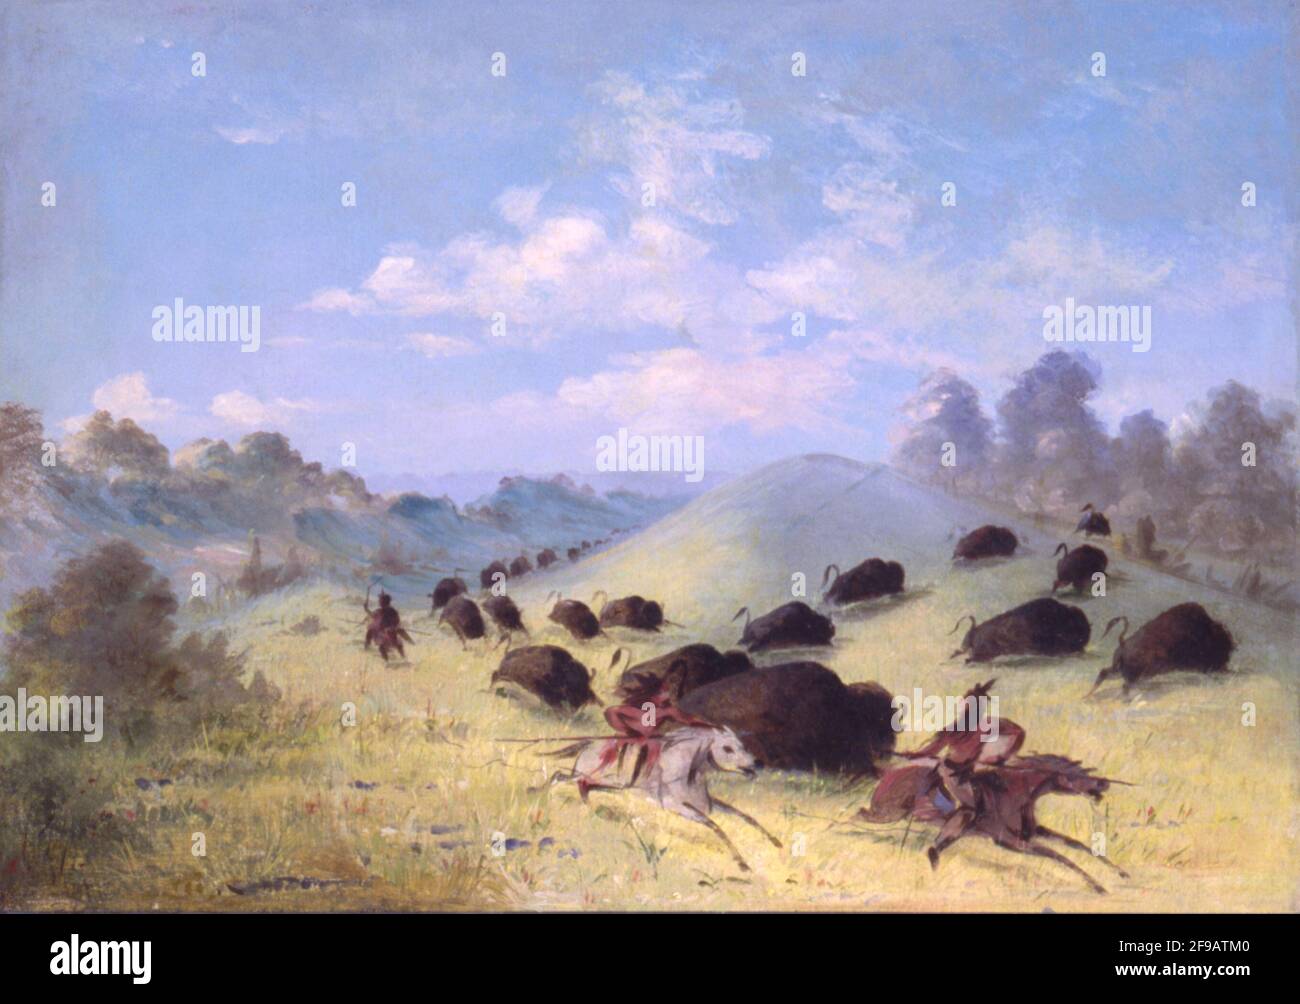 Comanche Indians Chasing Buffalo with Lances and Bows, 1846-1848. Stock Photo